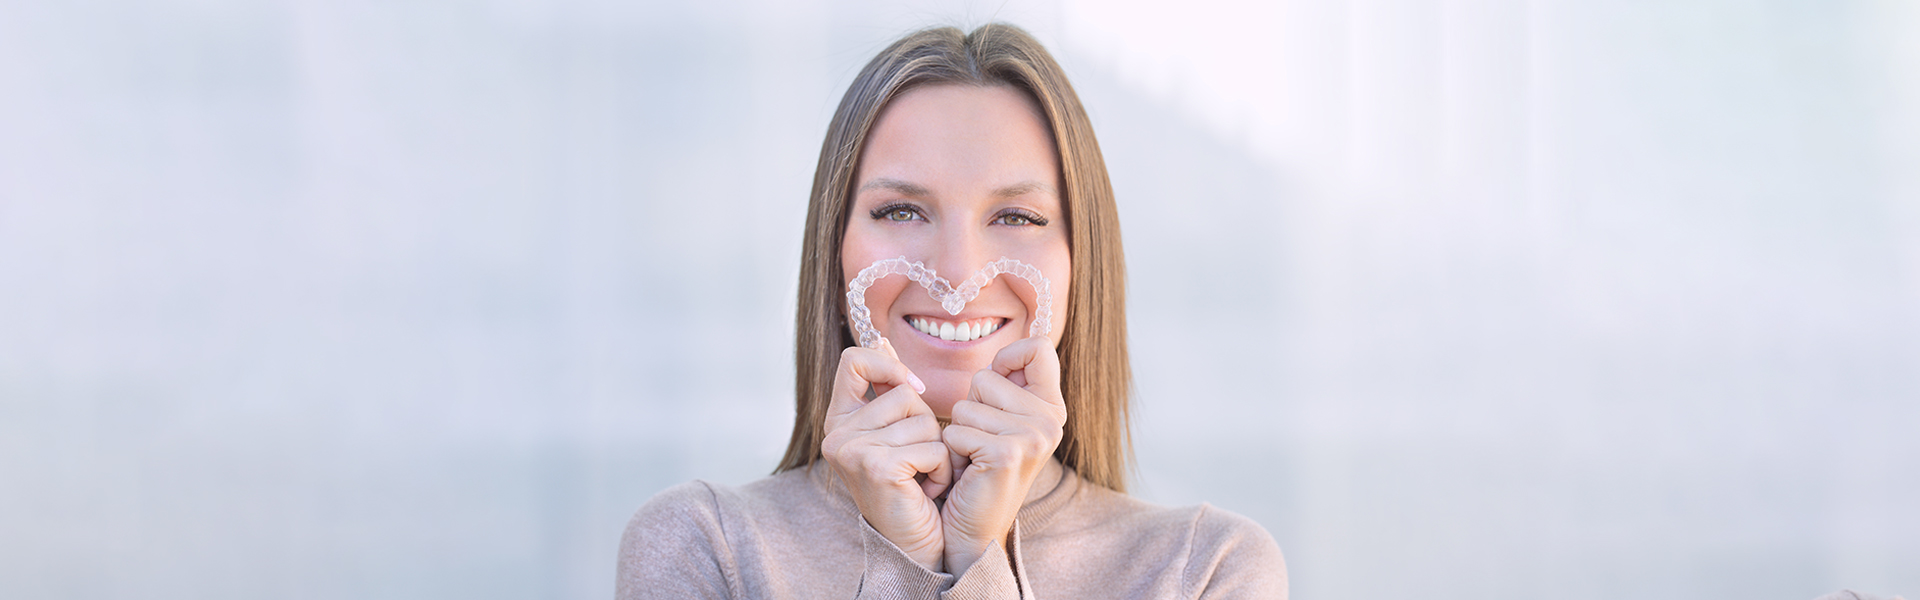 Does Invisalign Work? Pros, Cons, Cost & Effectiveness